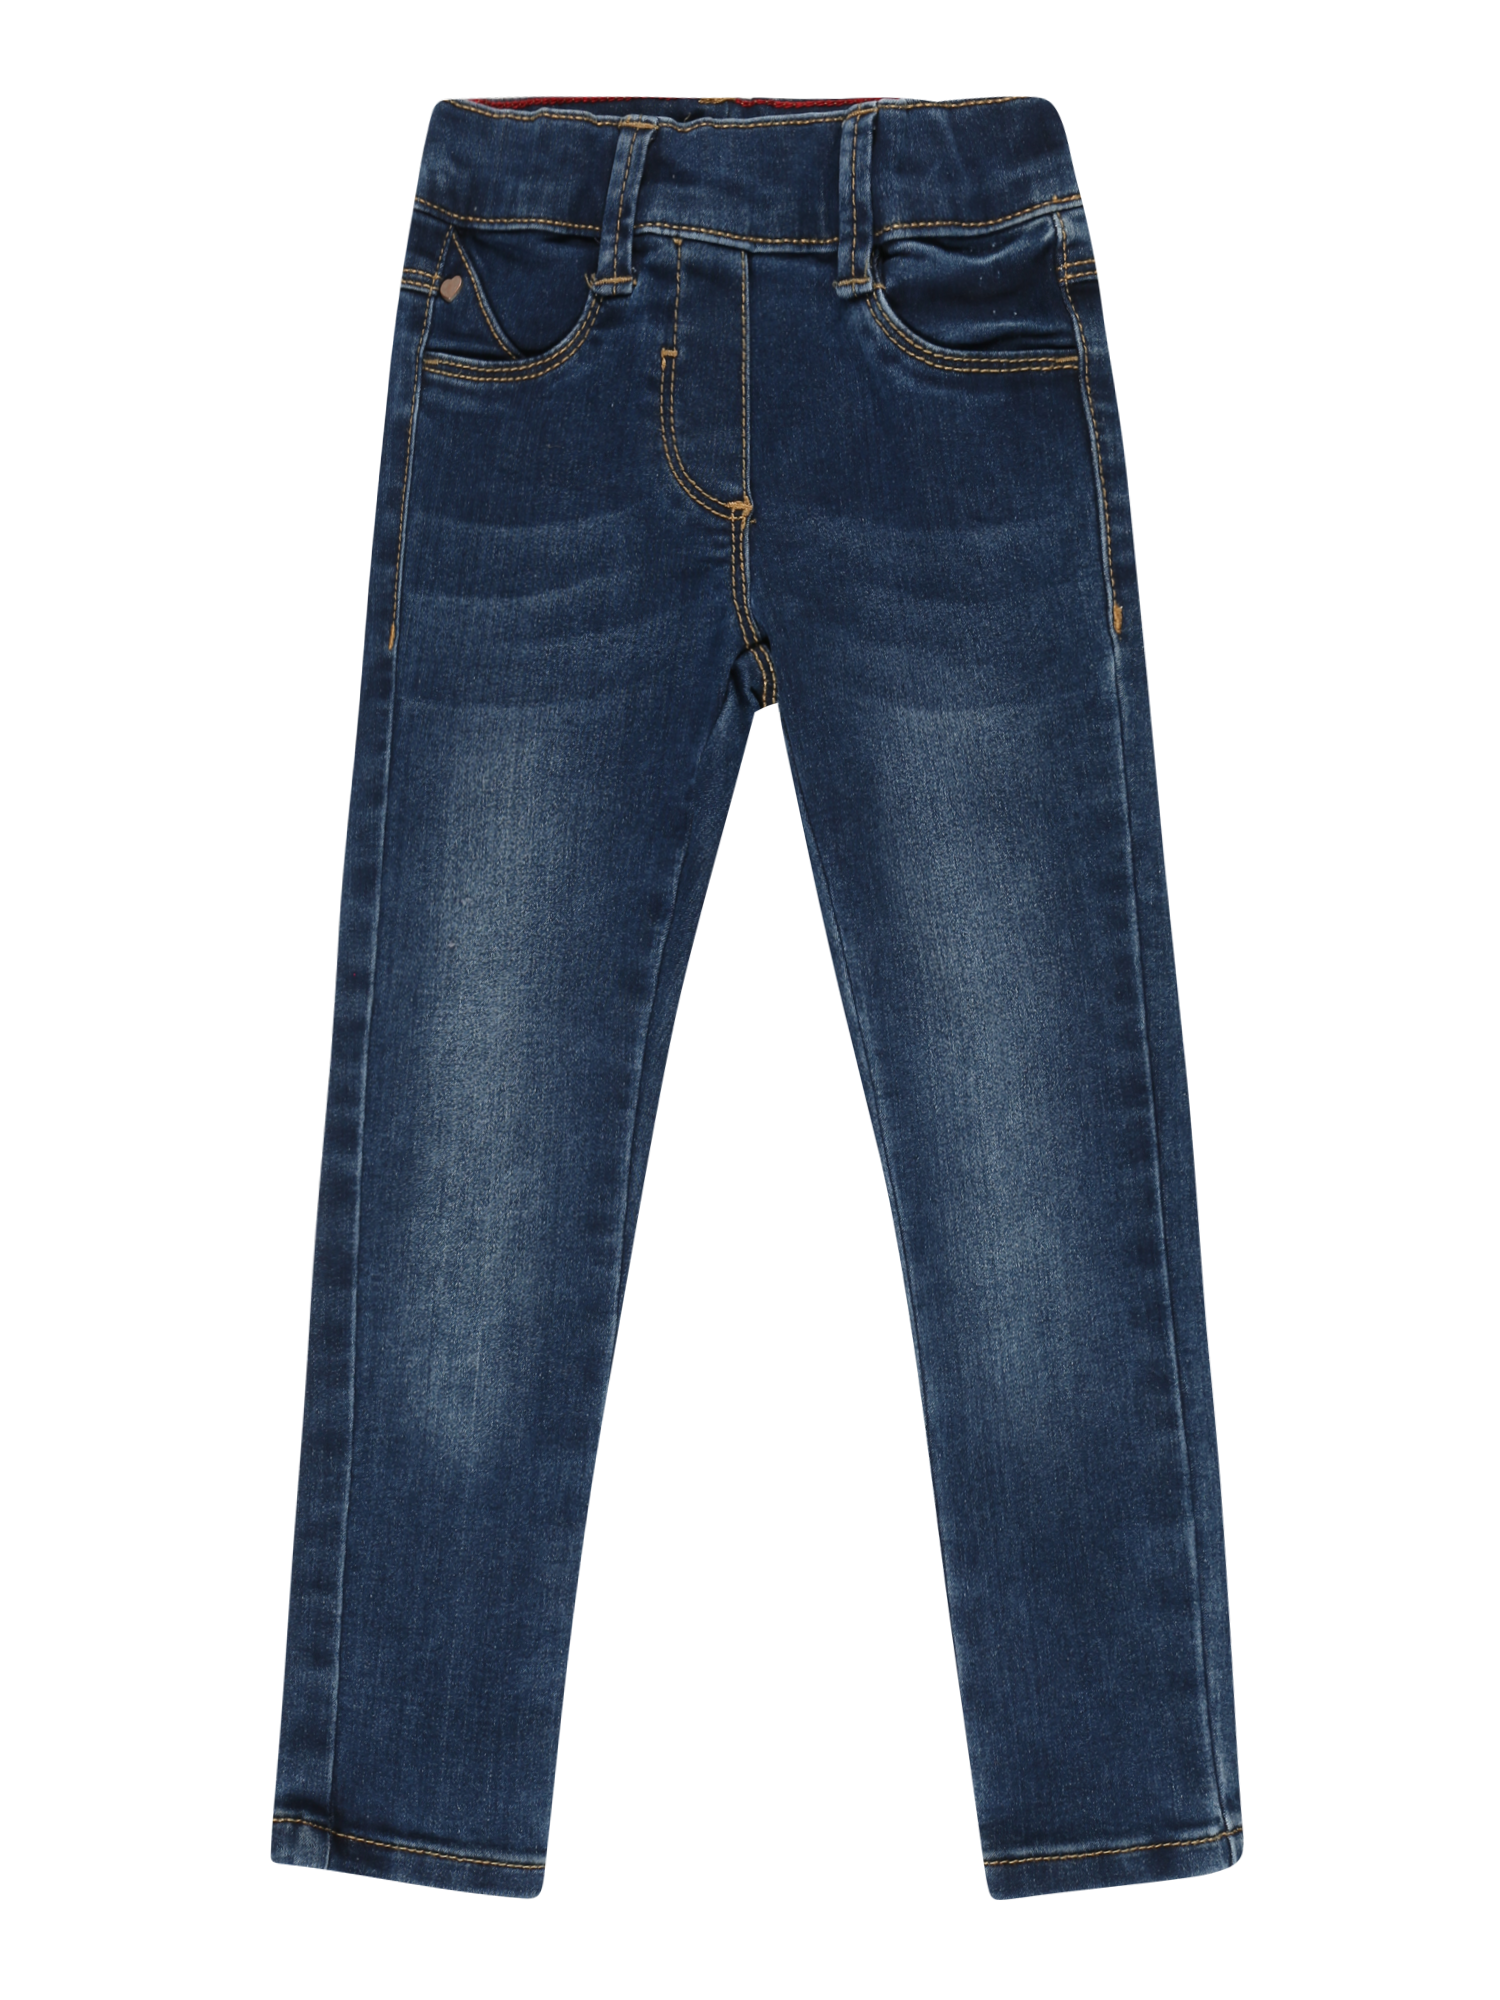 Bambina (taglie 92-140) 8AasA s.Oliver Jeans in Blu 